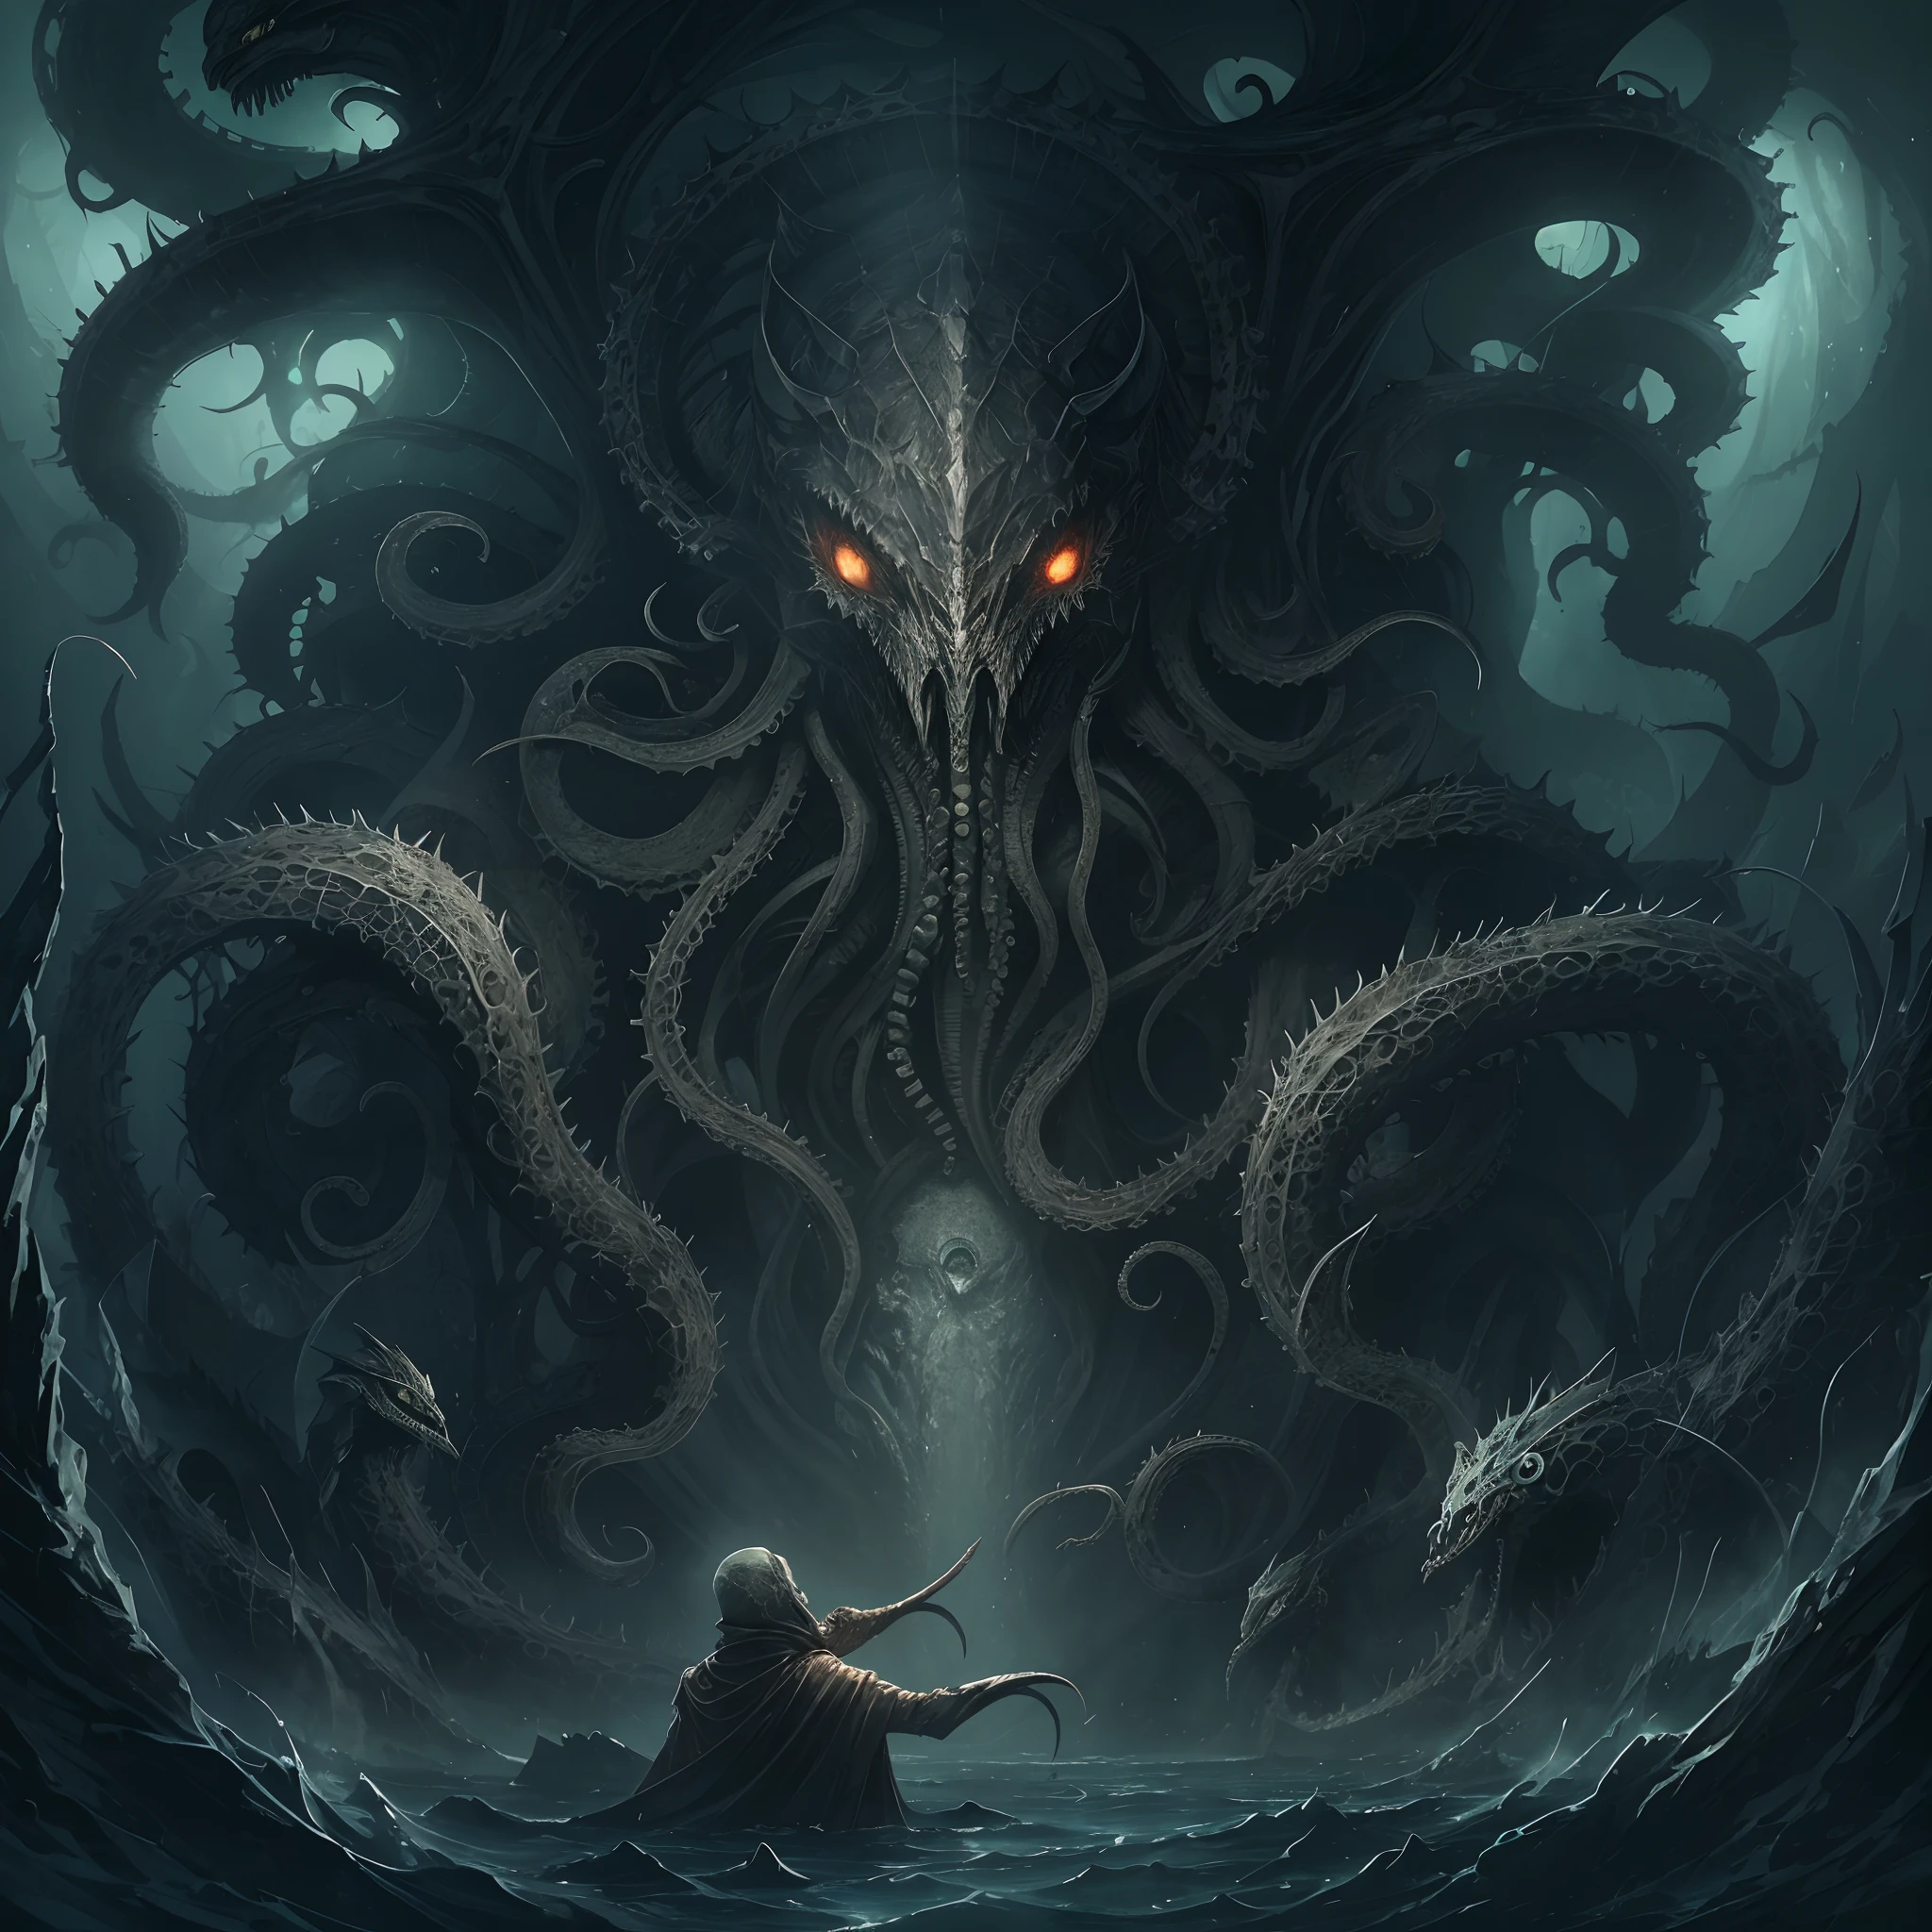 In the depths of cosmic expanse, a dark deity awakes,
Cthulhu, the ancient one, with tentacles that make hearts quake.
A being of immense power, beyond mortal comprehension,
Emerges from the abyss, heralding cosmic ascension.

With grotesque form and madness imbued,
Cthulhu, the great old one, brings terror and truth.
From the sunken city of R'lyeh, he rises,
With a cult of followers who are willing sacrifices.

But amidst this nightmare, a story unfolds,
Of a child born of chaos, a tale yet untold.
A being of both worlds, a hybrid divine,
With a heart that yearns for love, a soul that longs to shine.

For in that monstrous union, a glimmer of hope resides,
A creature destined to bridge the cosmic divides.
With a touch of humanity, born from forbidden embrace,
They embody duality, both horror and grace.

As they traverse this world, surrounded by fear,
They seek understanding, longing to be near.
The child of Cthulhu, born of ancient lore,
A symbol of unity, their fates intertwined forevermore.

For even in darkness, there's a flicker of light,
A ray of compassion, piercing through the night.
In the depths of their being, they find solace and peace,
Embracing their destiny, their love shall never cease.

So let us ponder this tale, of a father and ,
Of Cthulhu, the elder, and his offspring so wild.
For within the depths of horror, beauty can bloom,
And even in Lovecraftian nightmares, compassion finds room.